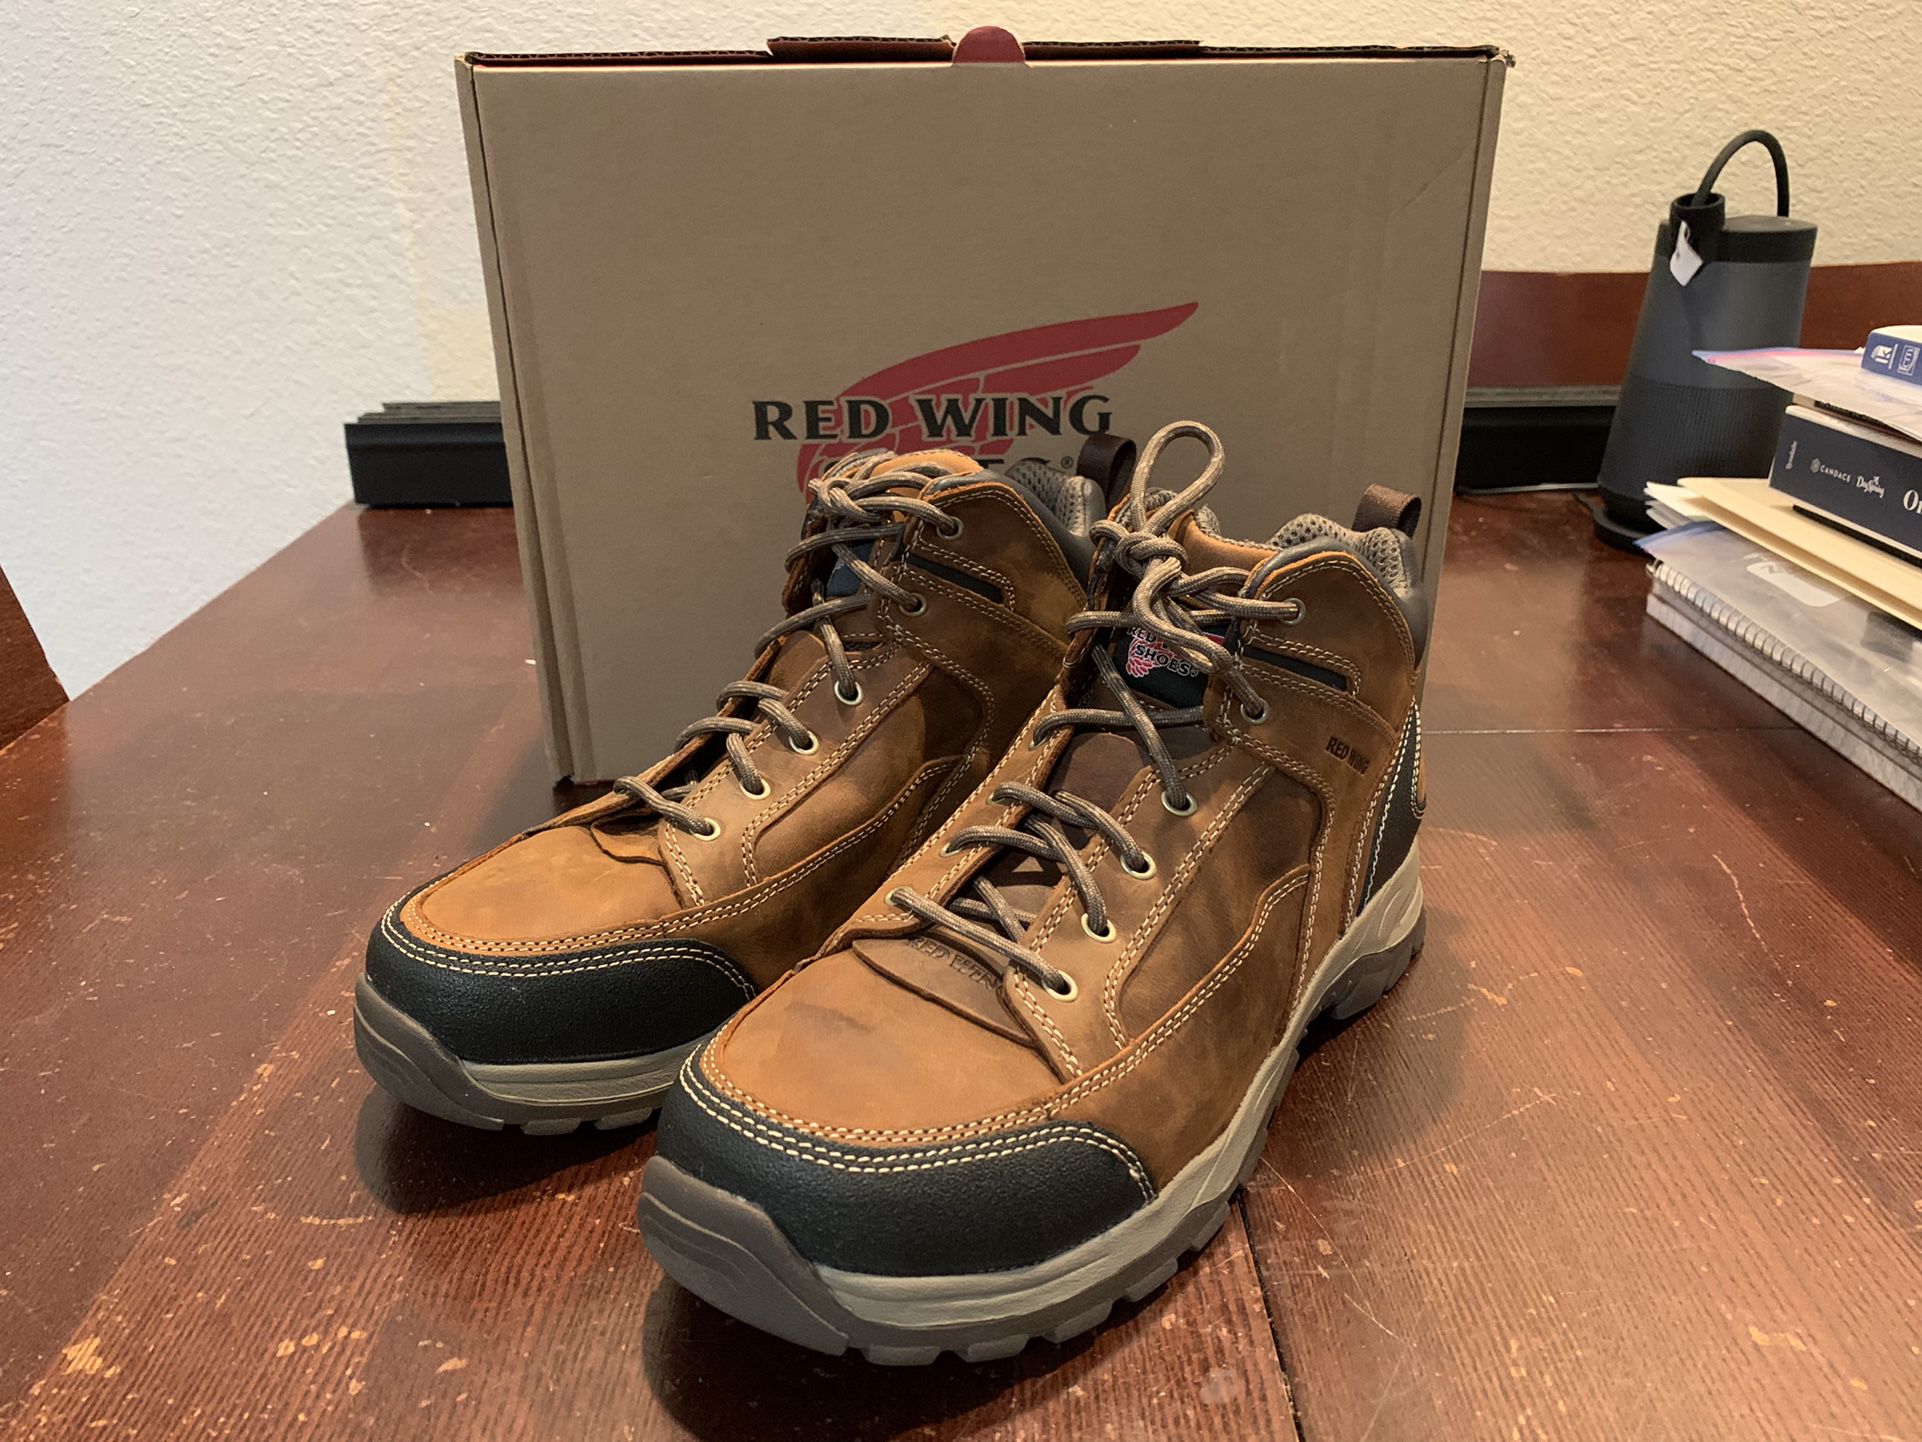 Red Wing Men’s Truhiker boots size 11.5D